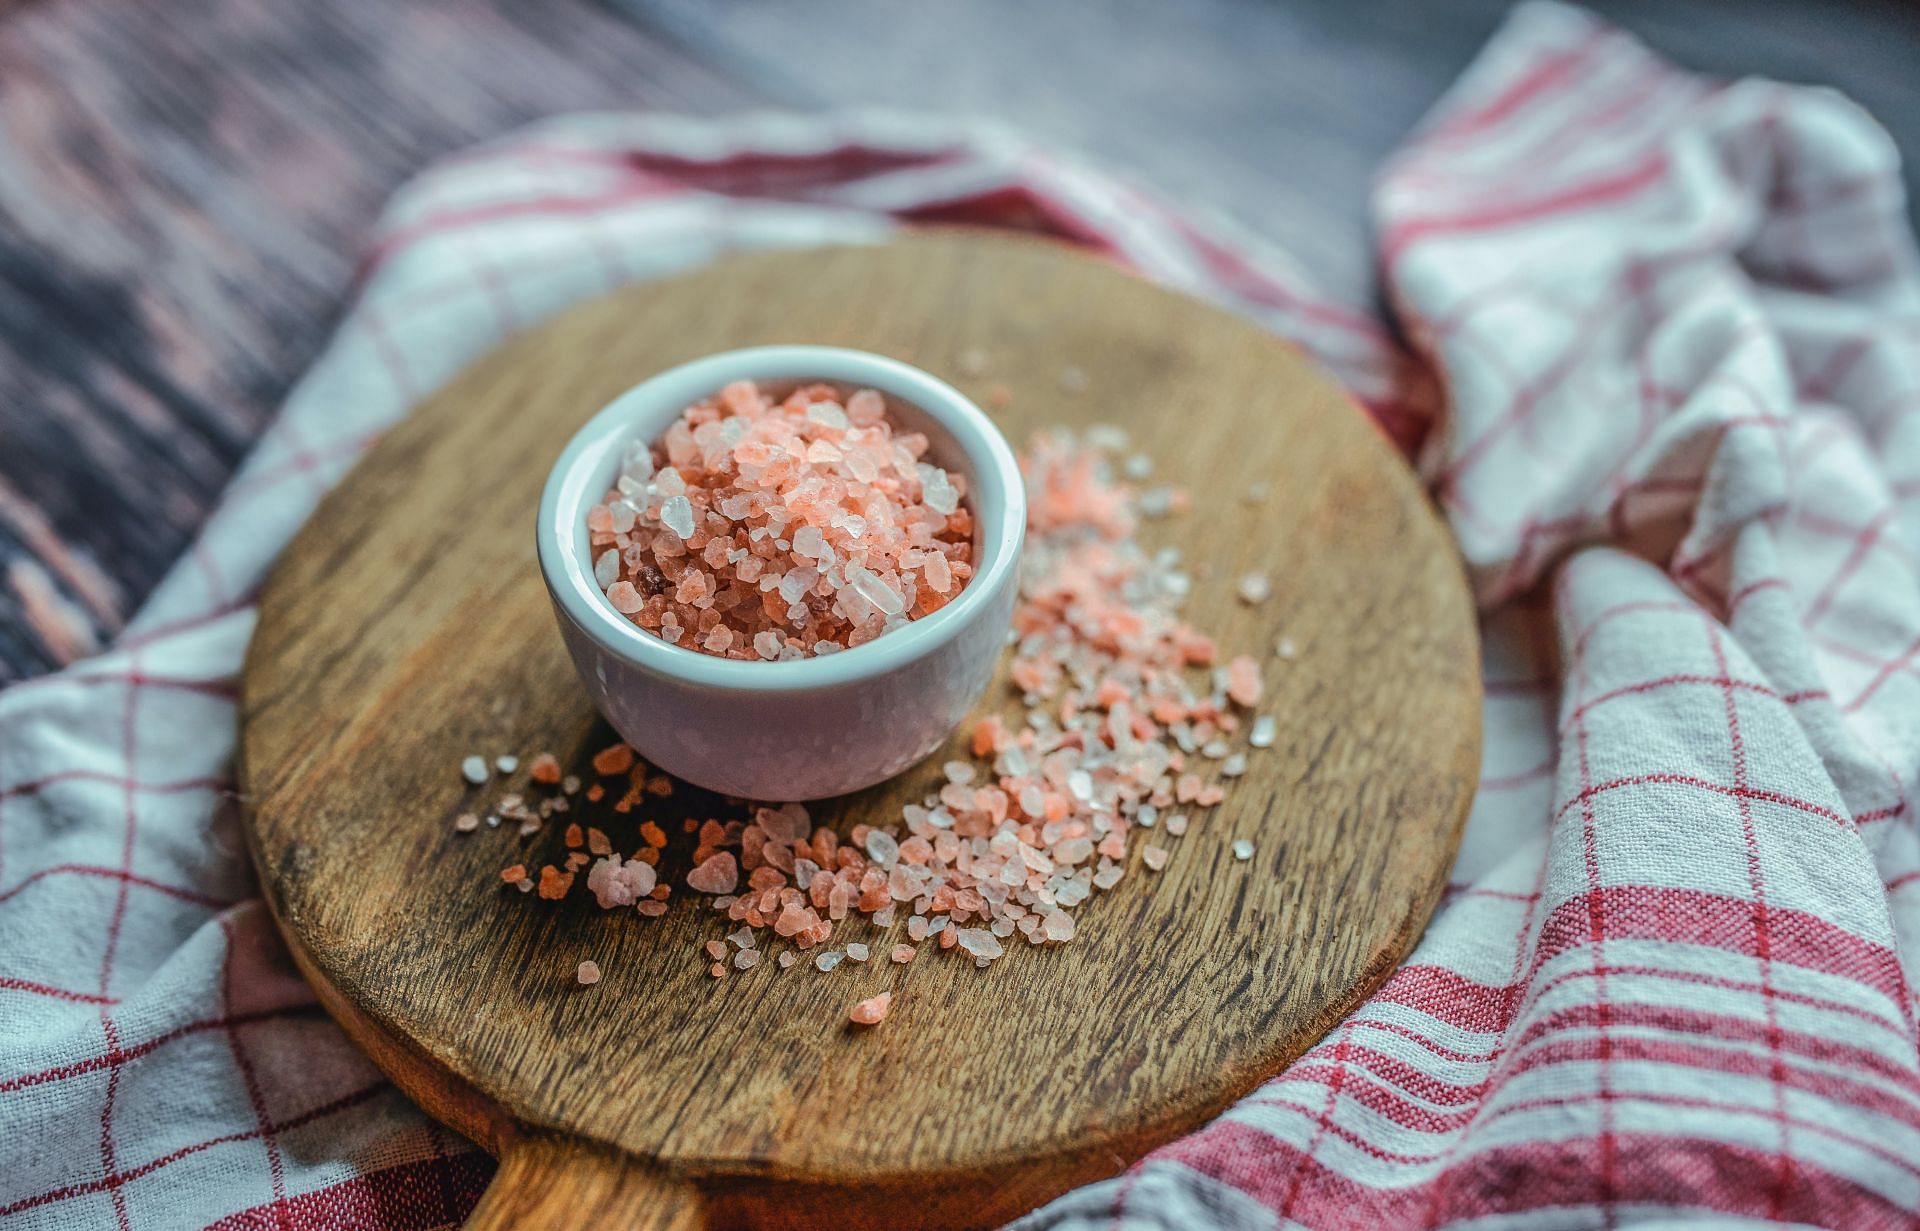 Ways to reduce sodium intake from your diet (image sourced via Pexels / Photo by monicore)